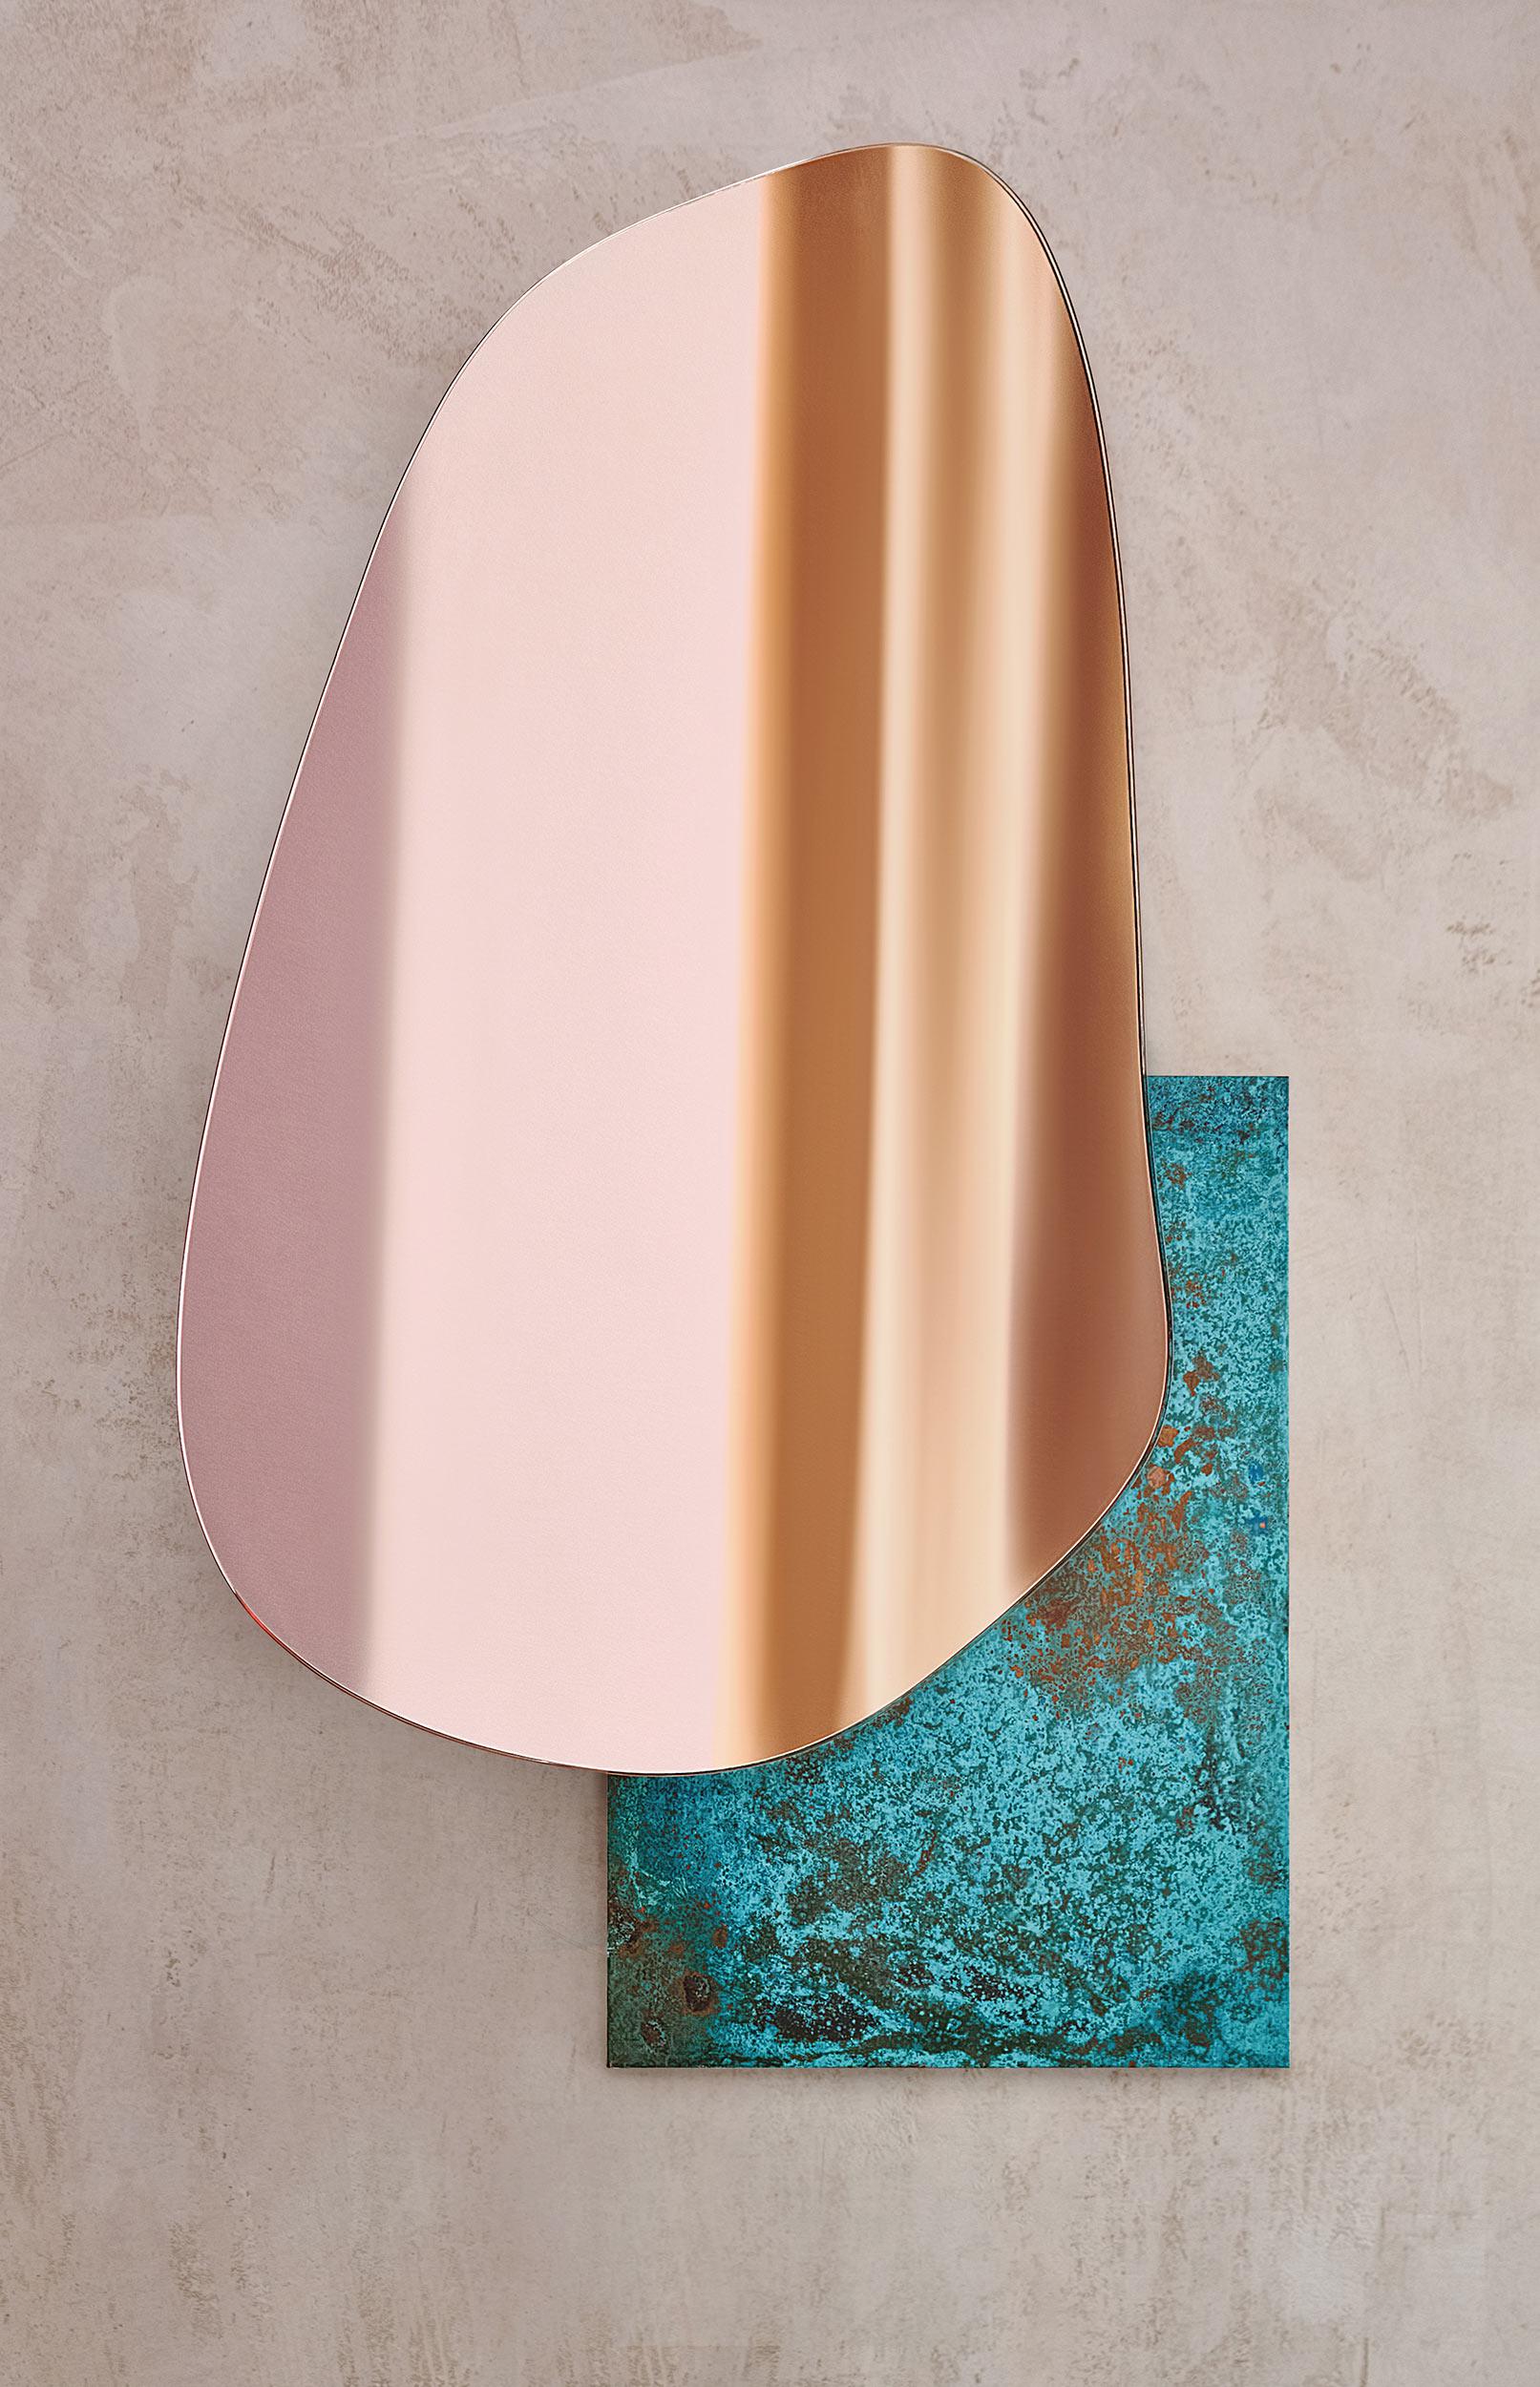 Painted Wall Mirror Lake 3 by Noom with White Marble Statuario Base and Copper Tint